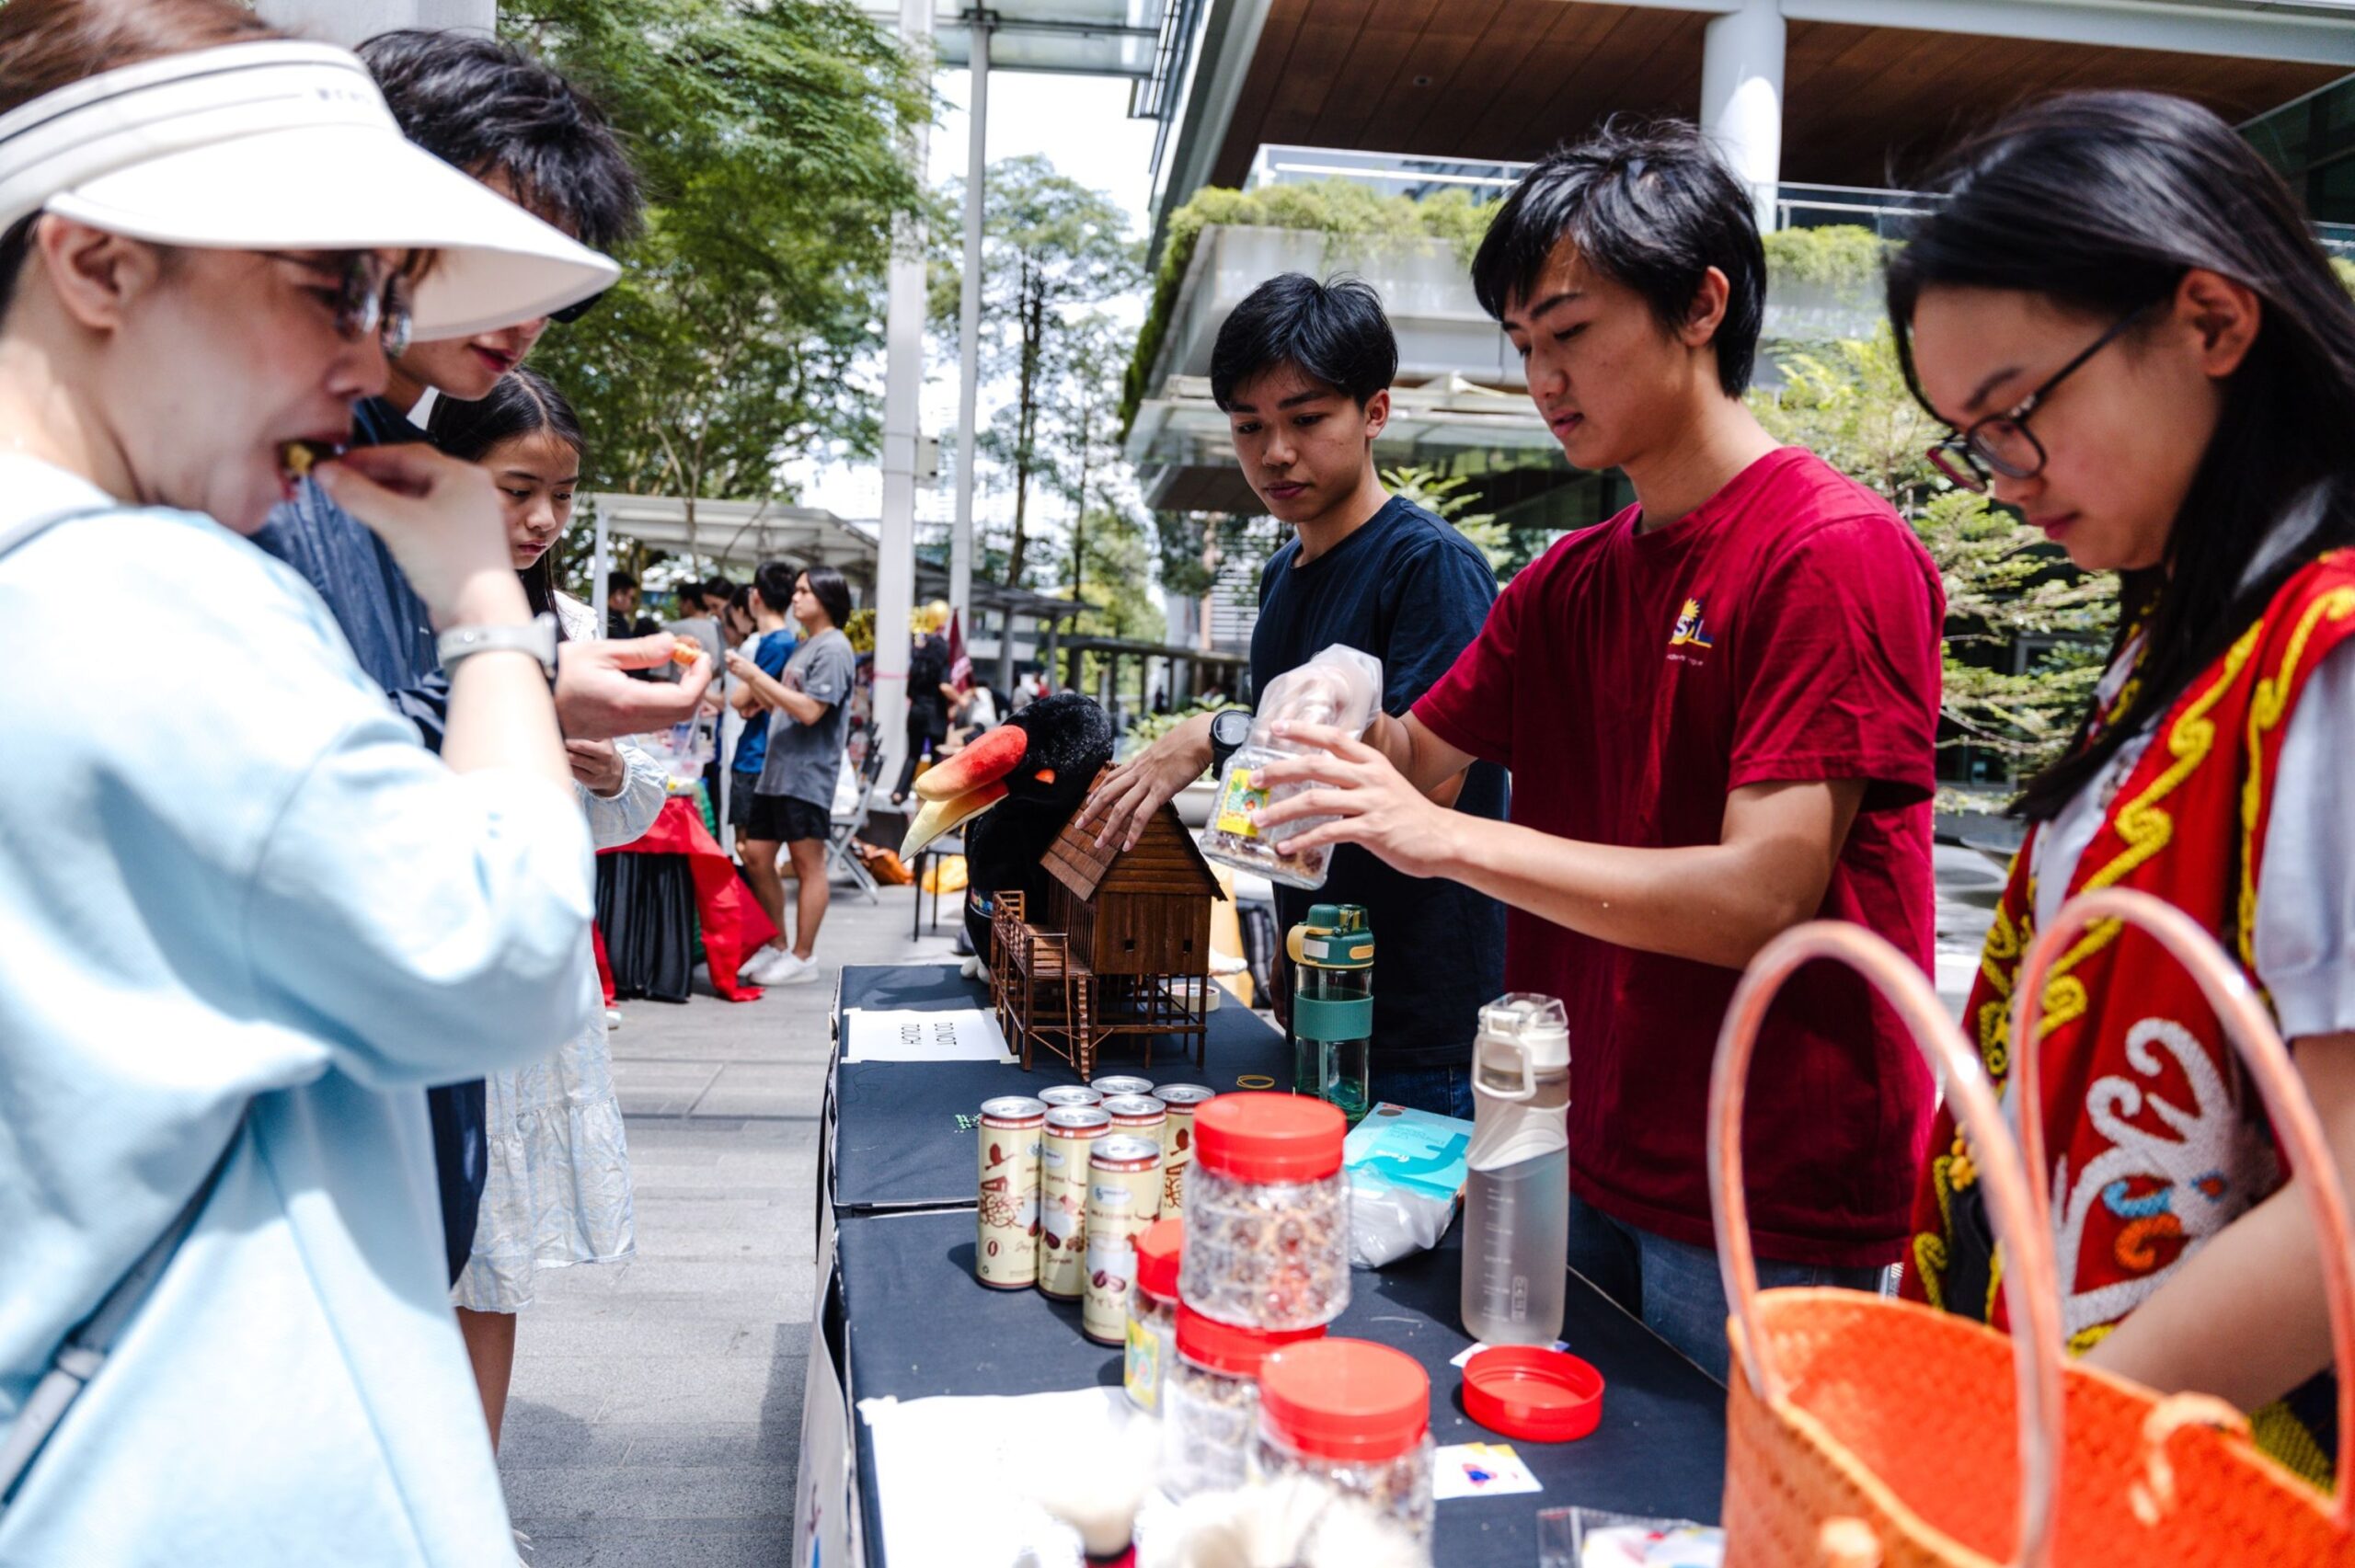 The Malaysian Students’ League@NUS booth offered free traditional snacks from their country.